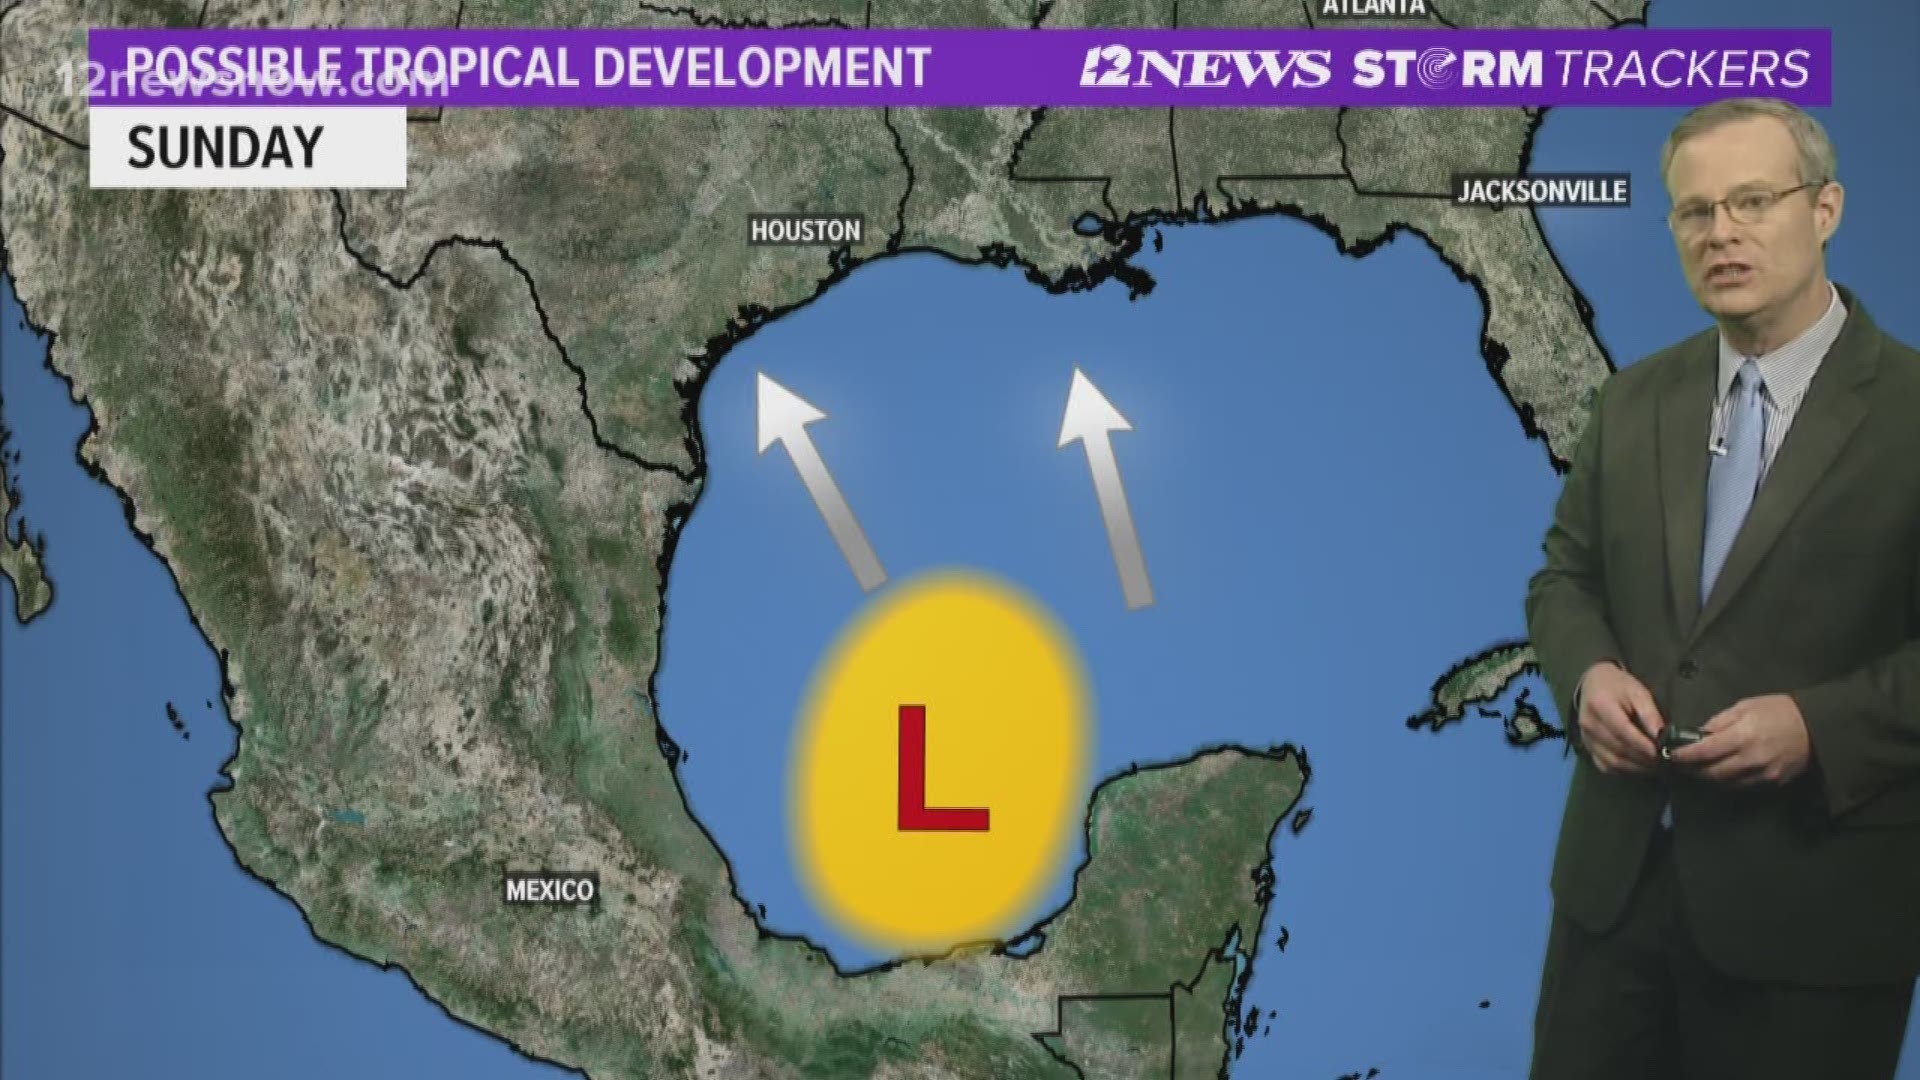 The third tropical storm of the season could form in the Gulf of Mexico